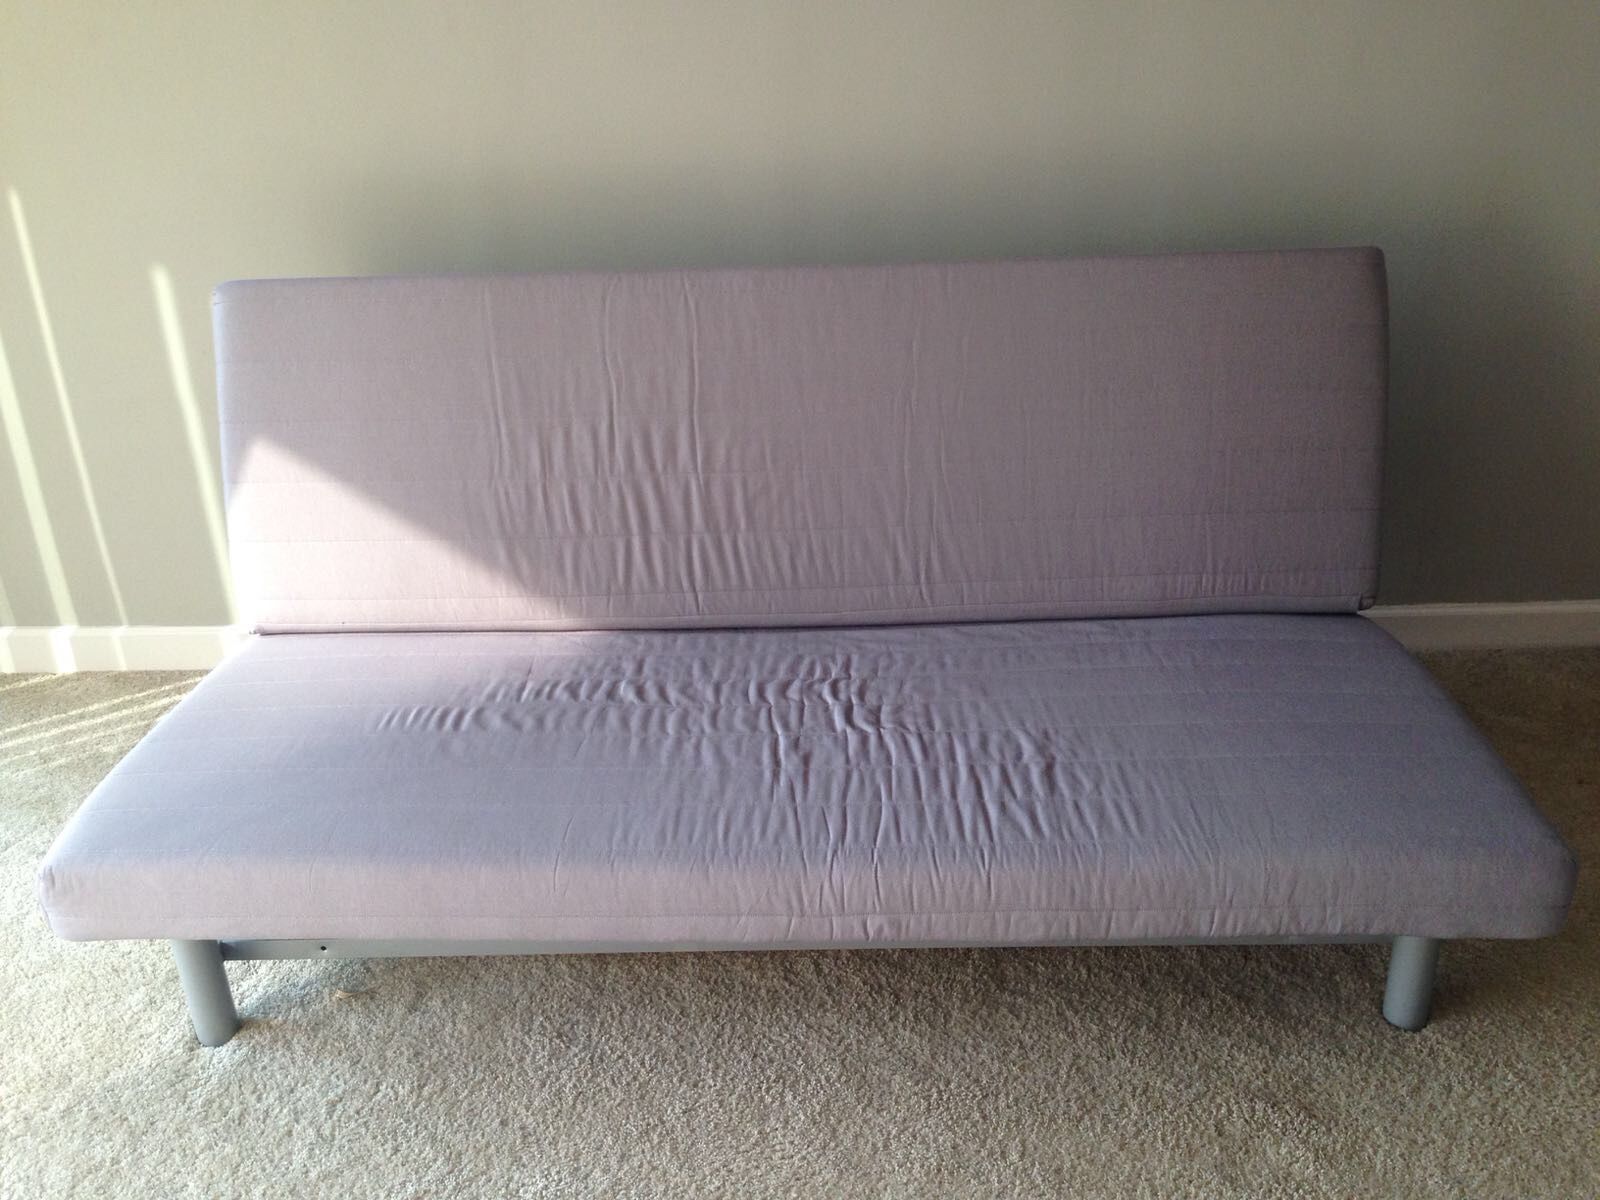 *MUST PICK UP THIS MORNING* Sofa bed, grey, good condition